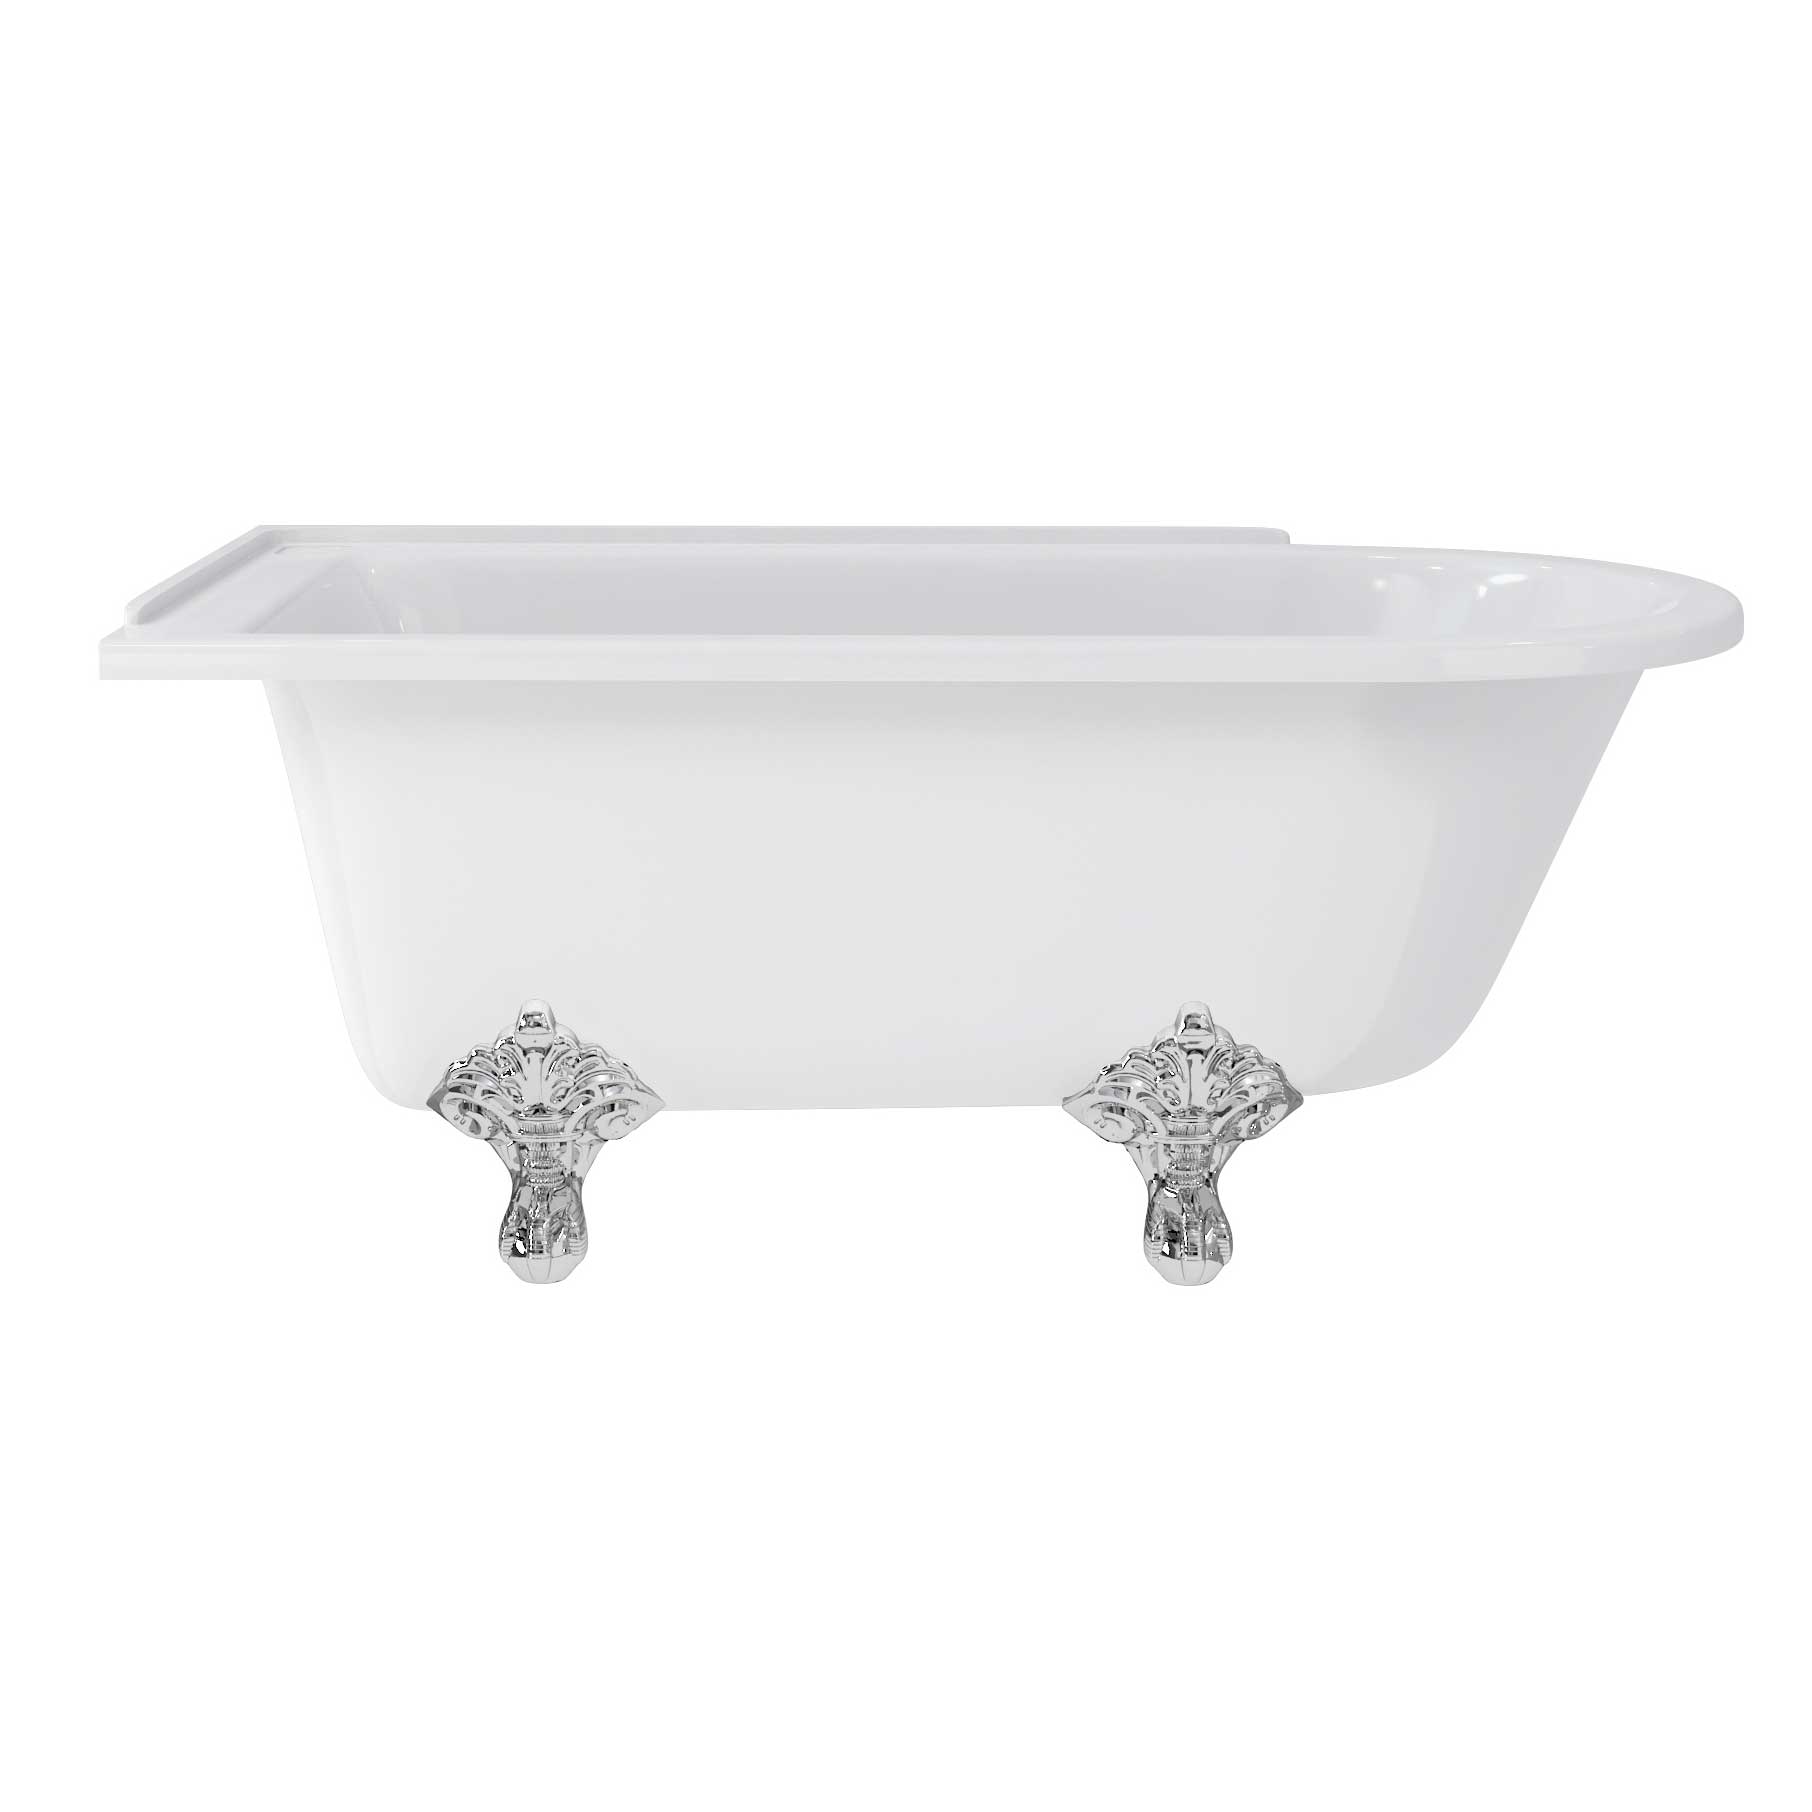 Image of double ended freestanding baths for small bathrooms